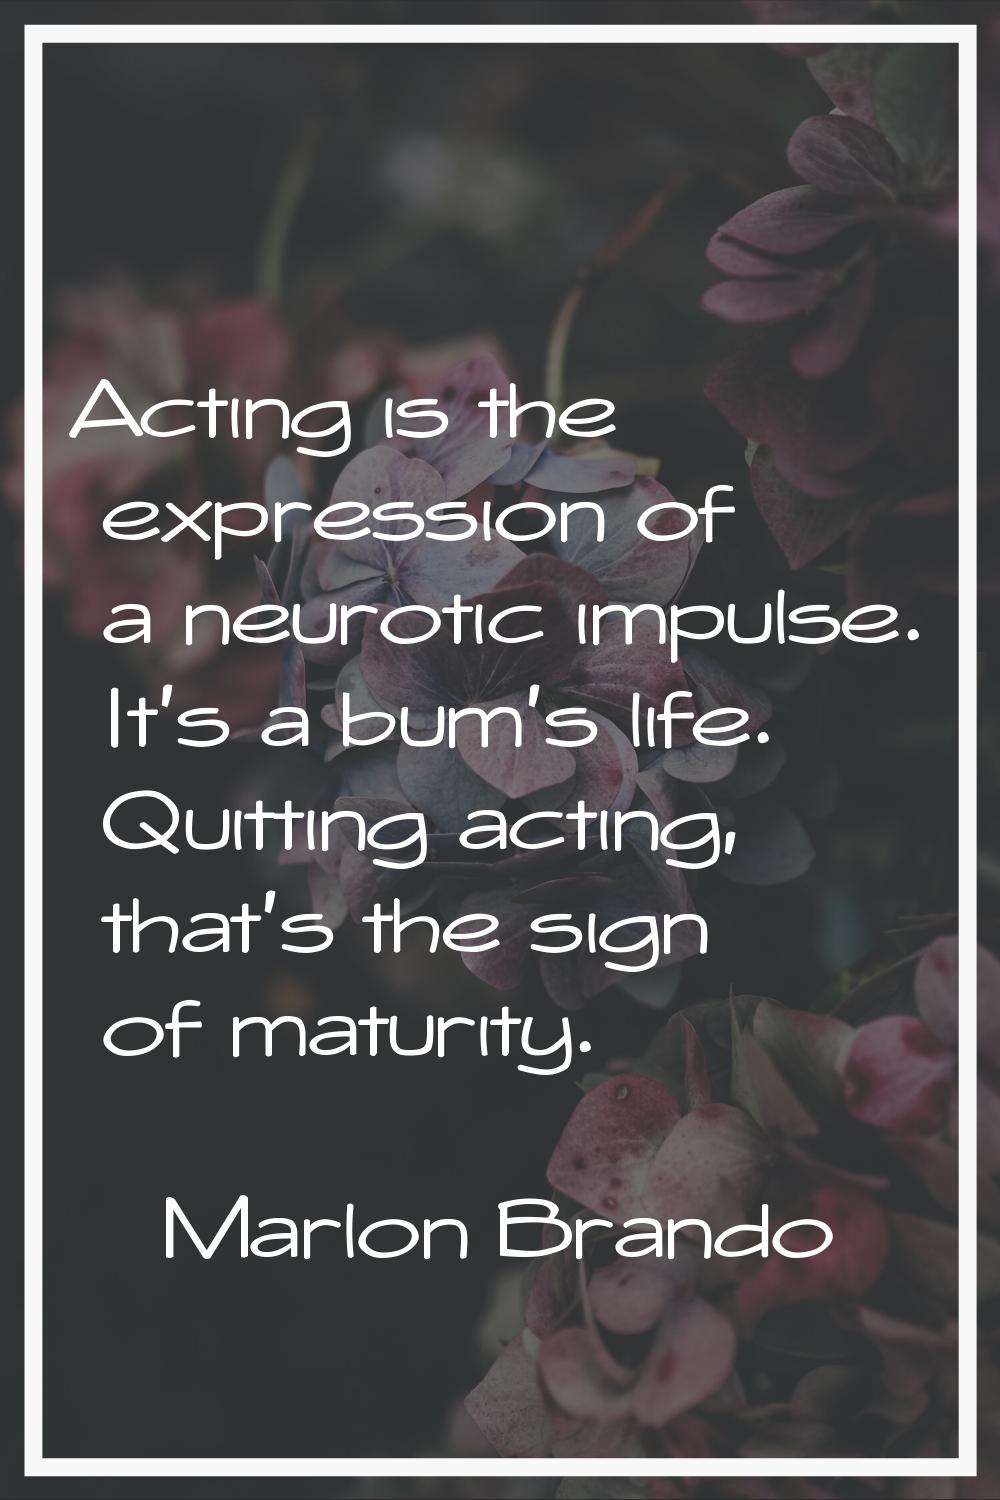 Acting is the expression of a neurotic impulse. It's a bum's life. Quitting acting, that's the sign